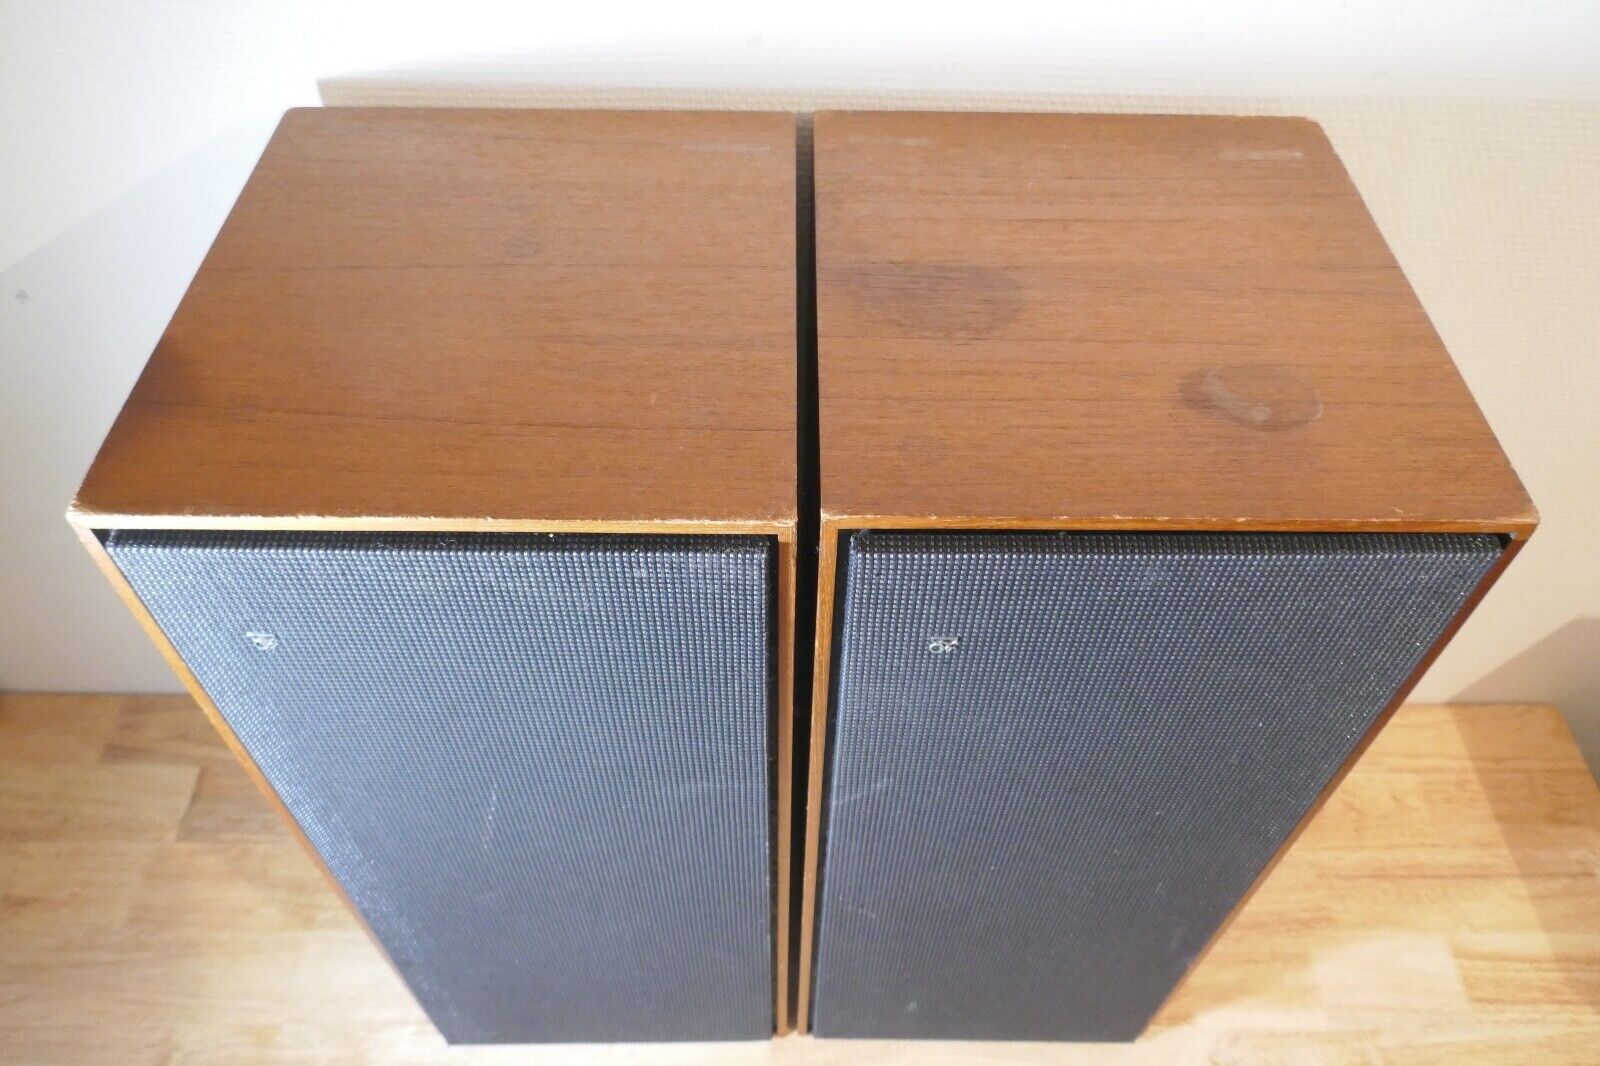 enceintes speakers bang and Olufsen ht 1500 vintage occasion